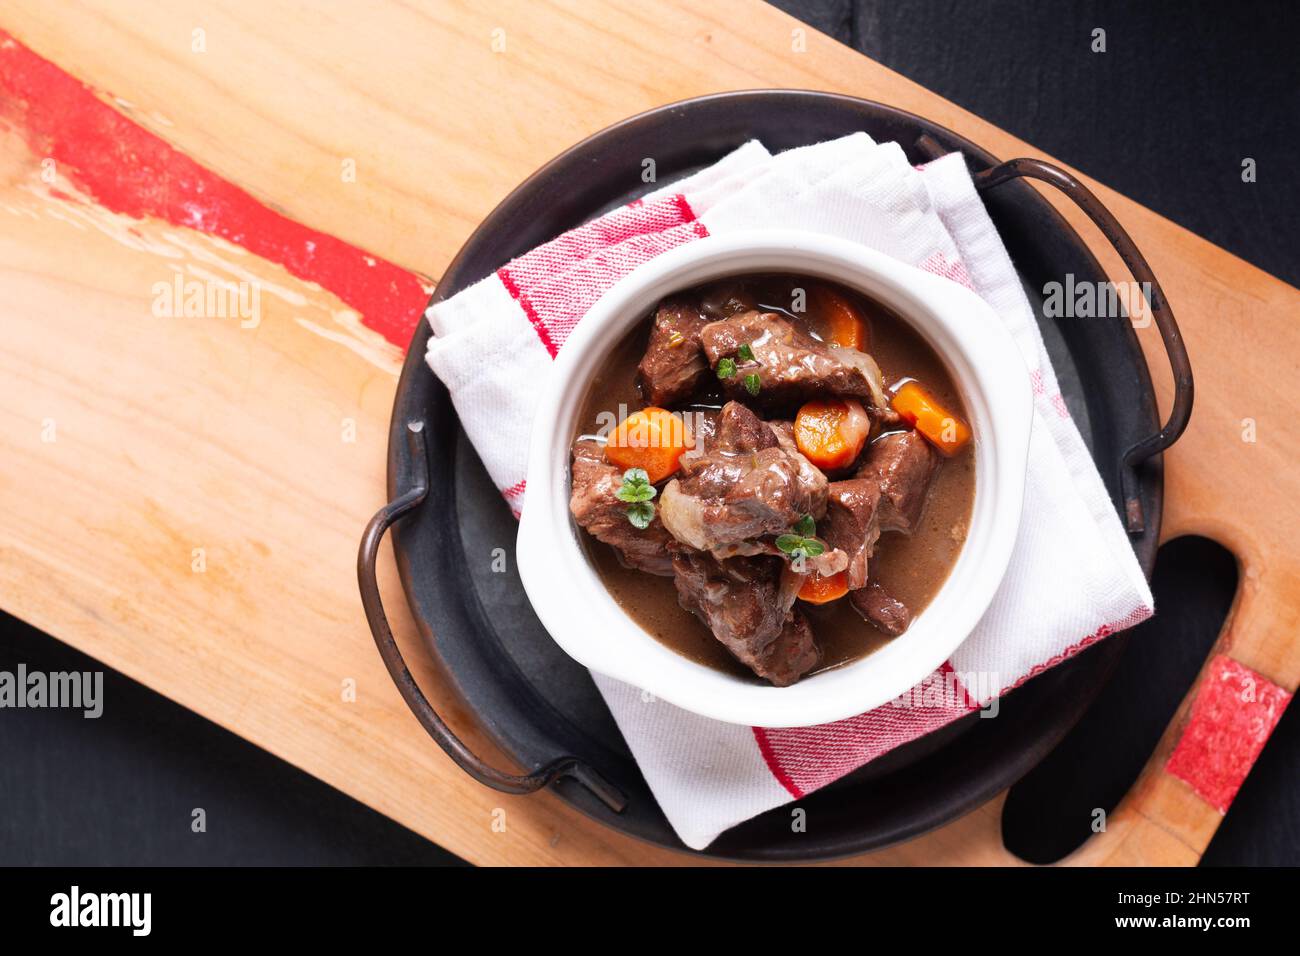 Food concept French red wine beef stew bourguignon on wooden board with copy space Stock Photo